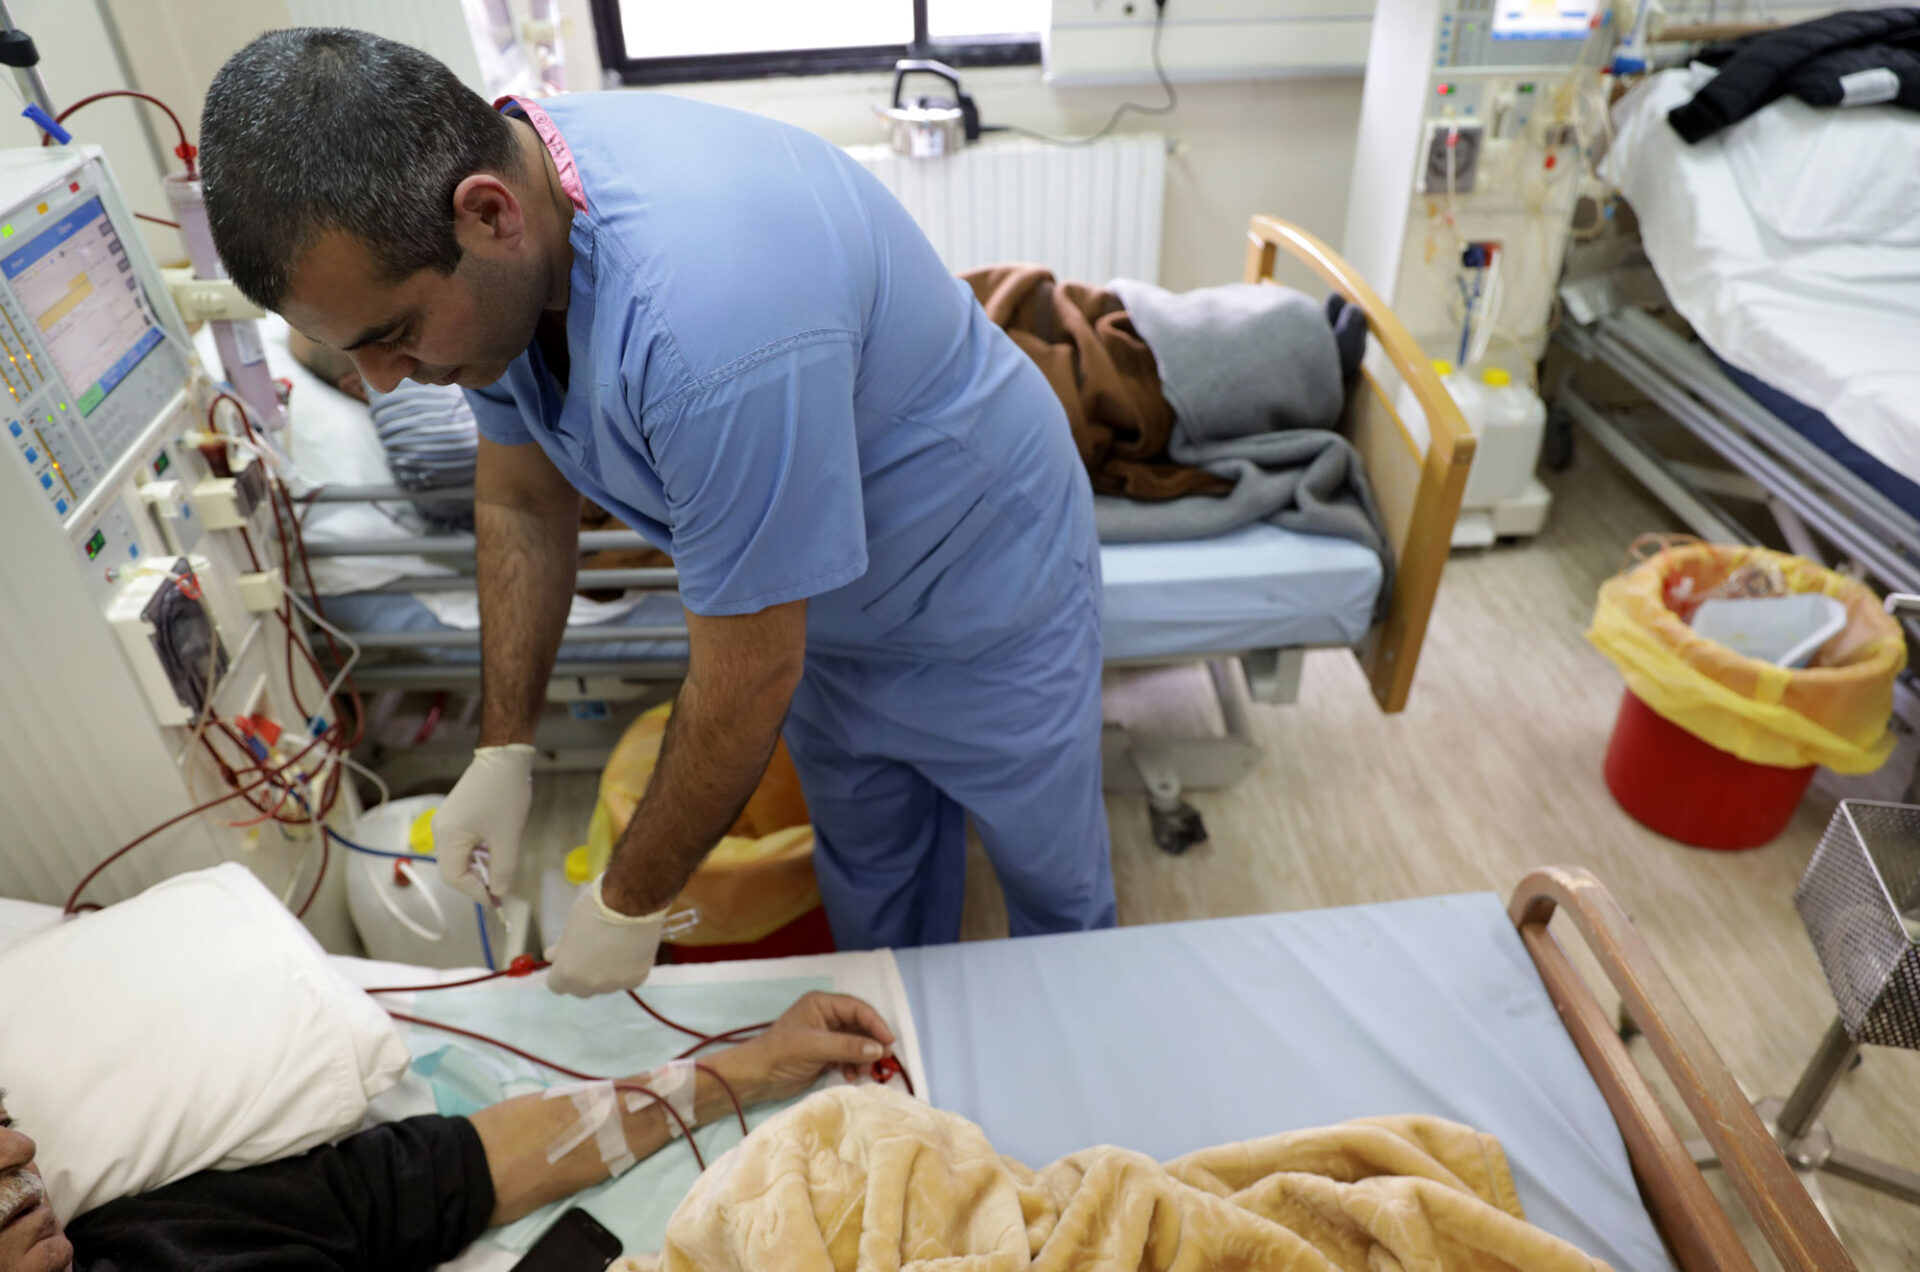 A health care worker leans over a hospital bed to administer anticoagulation medication to a patient.